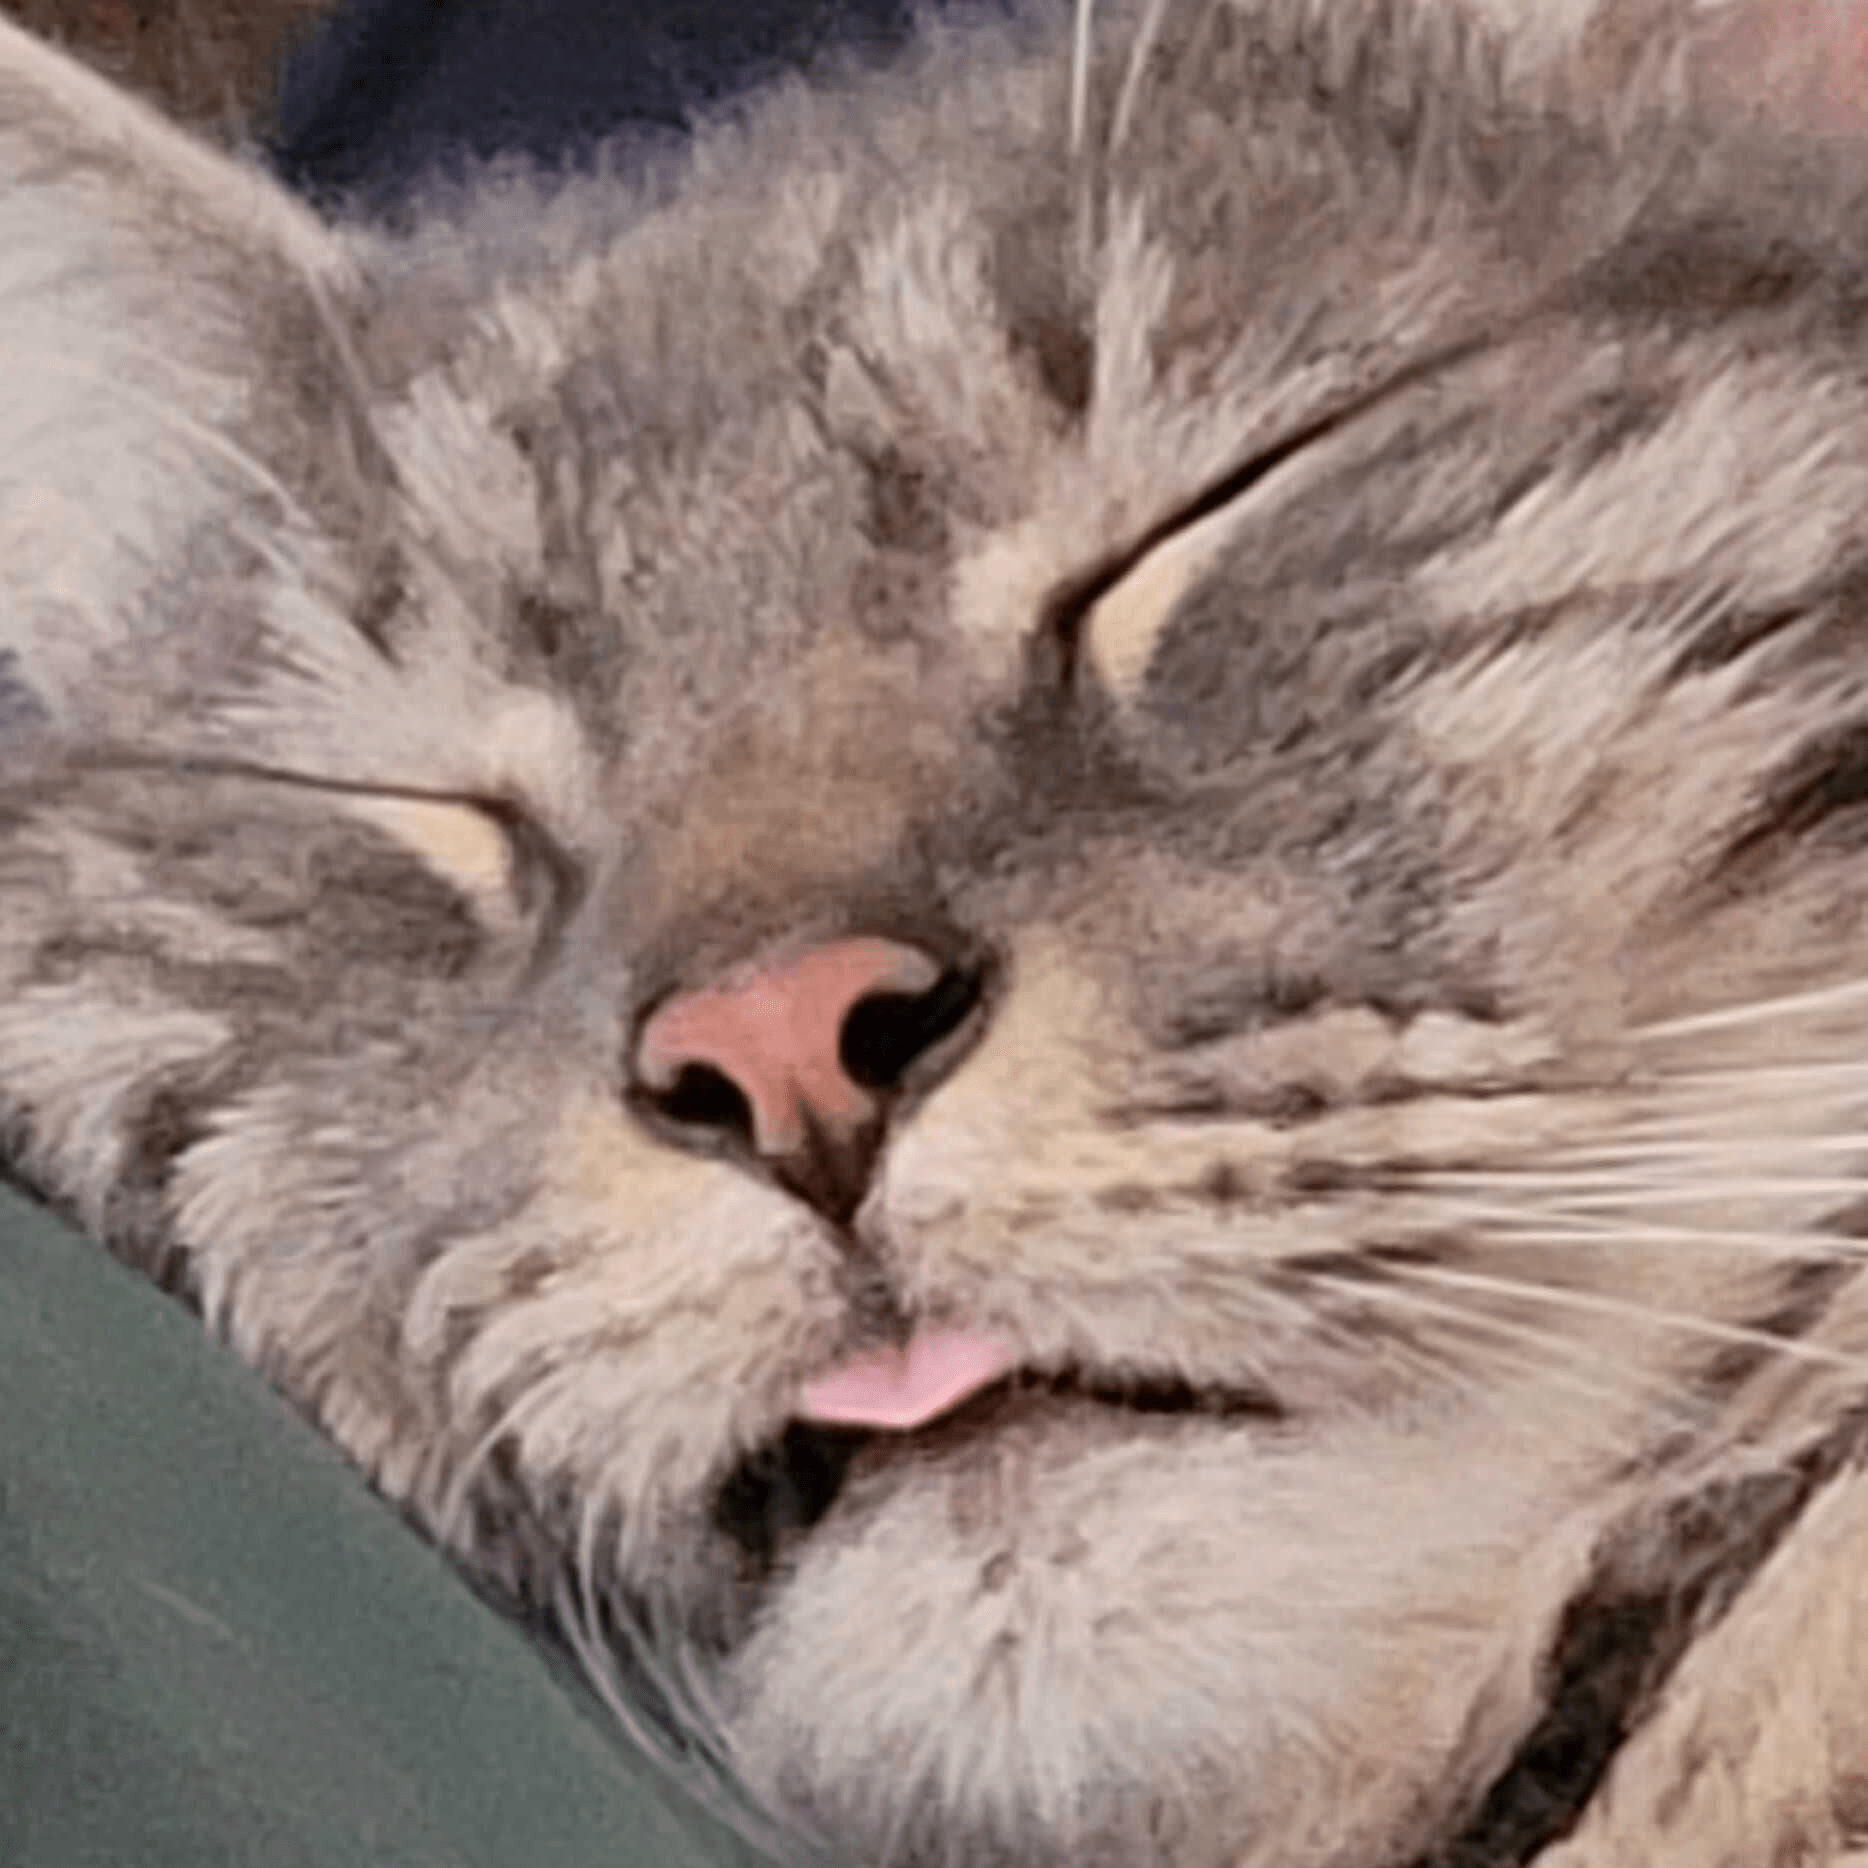 Neptune the cat and his tongue